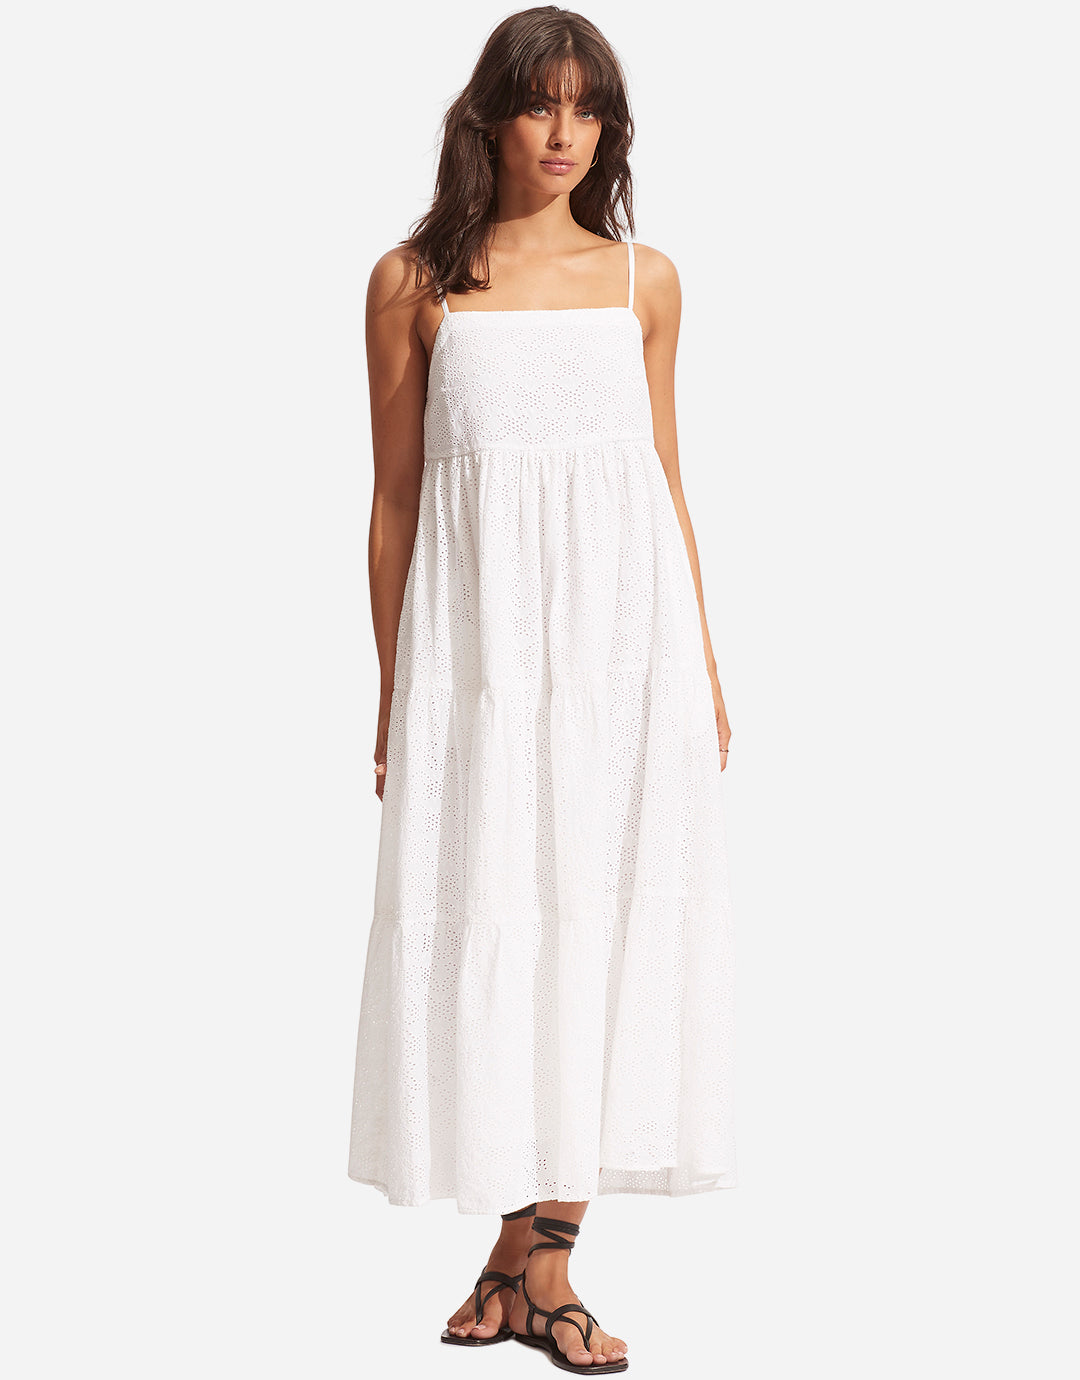 Embroidery Tiered Dress - White - Simply Beach UK